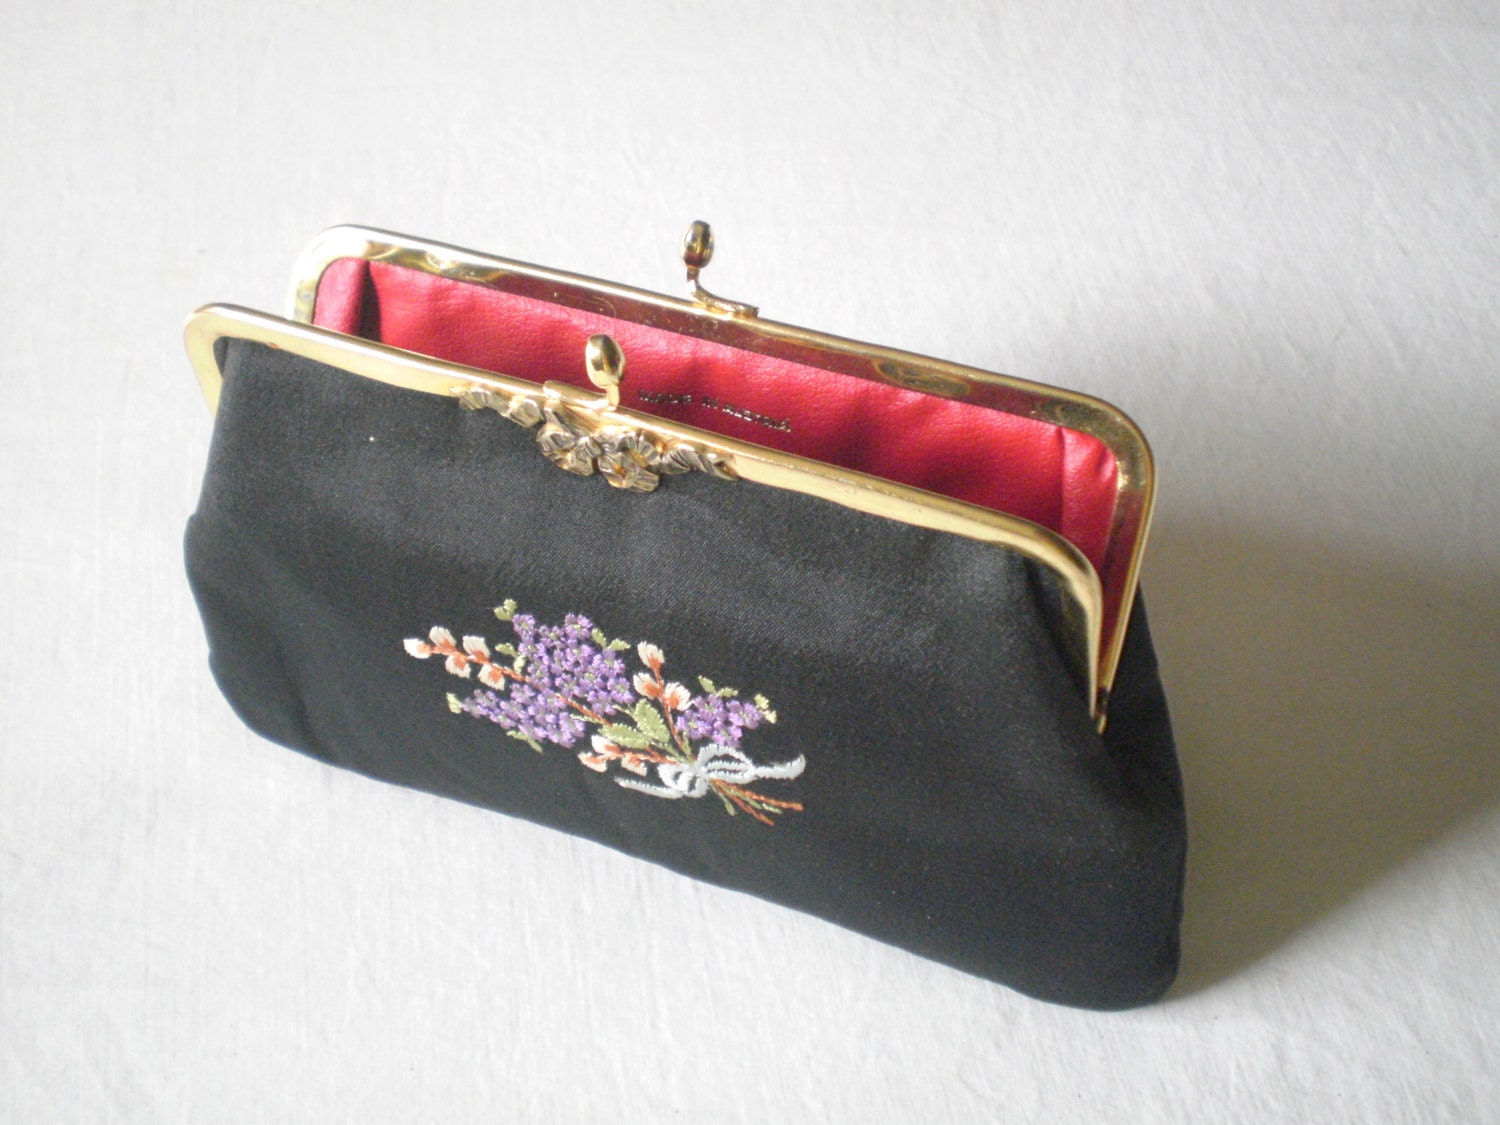 Vintage 50's Clutch Bag embroidered purse prom